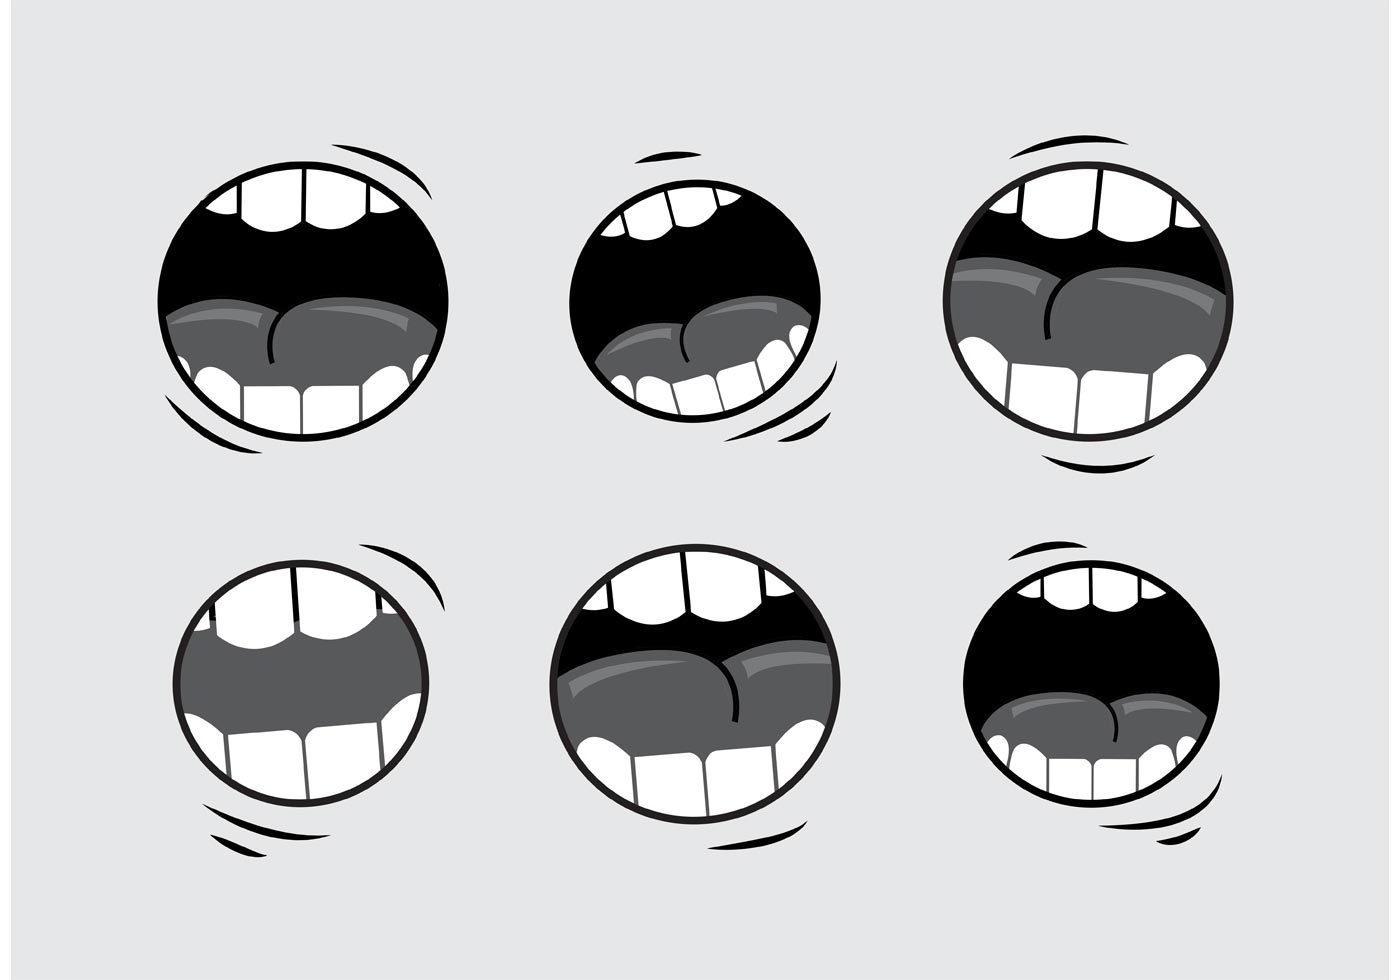 Mouth Talking Vectors - Download Free Vector Art, Stock Graphics & Images